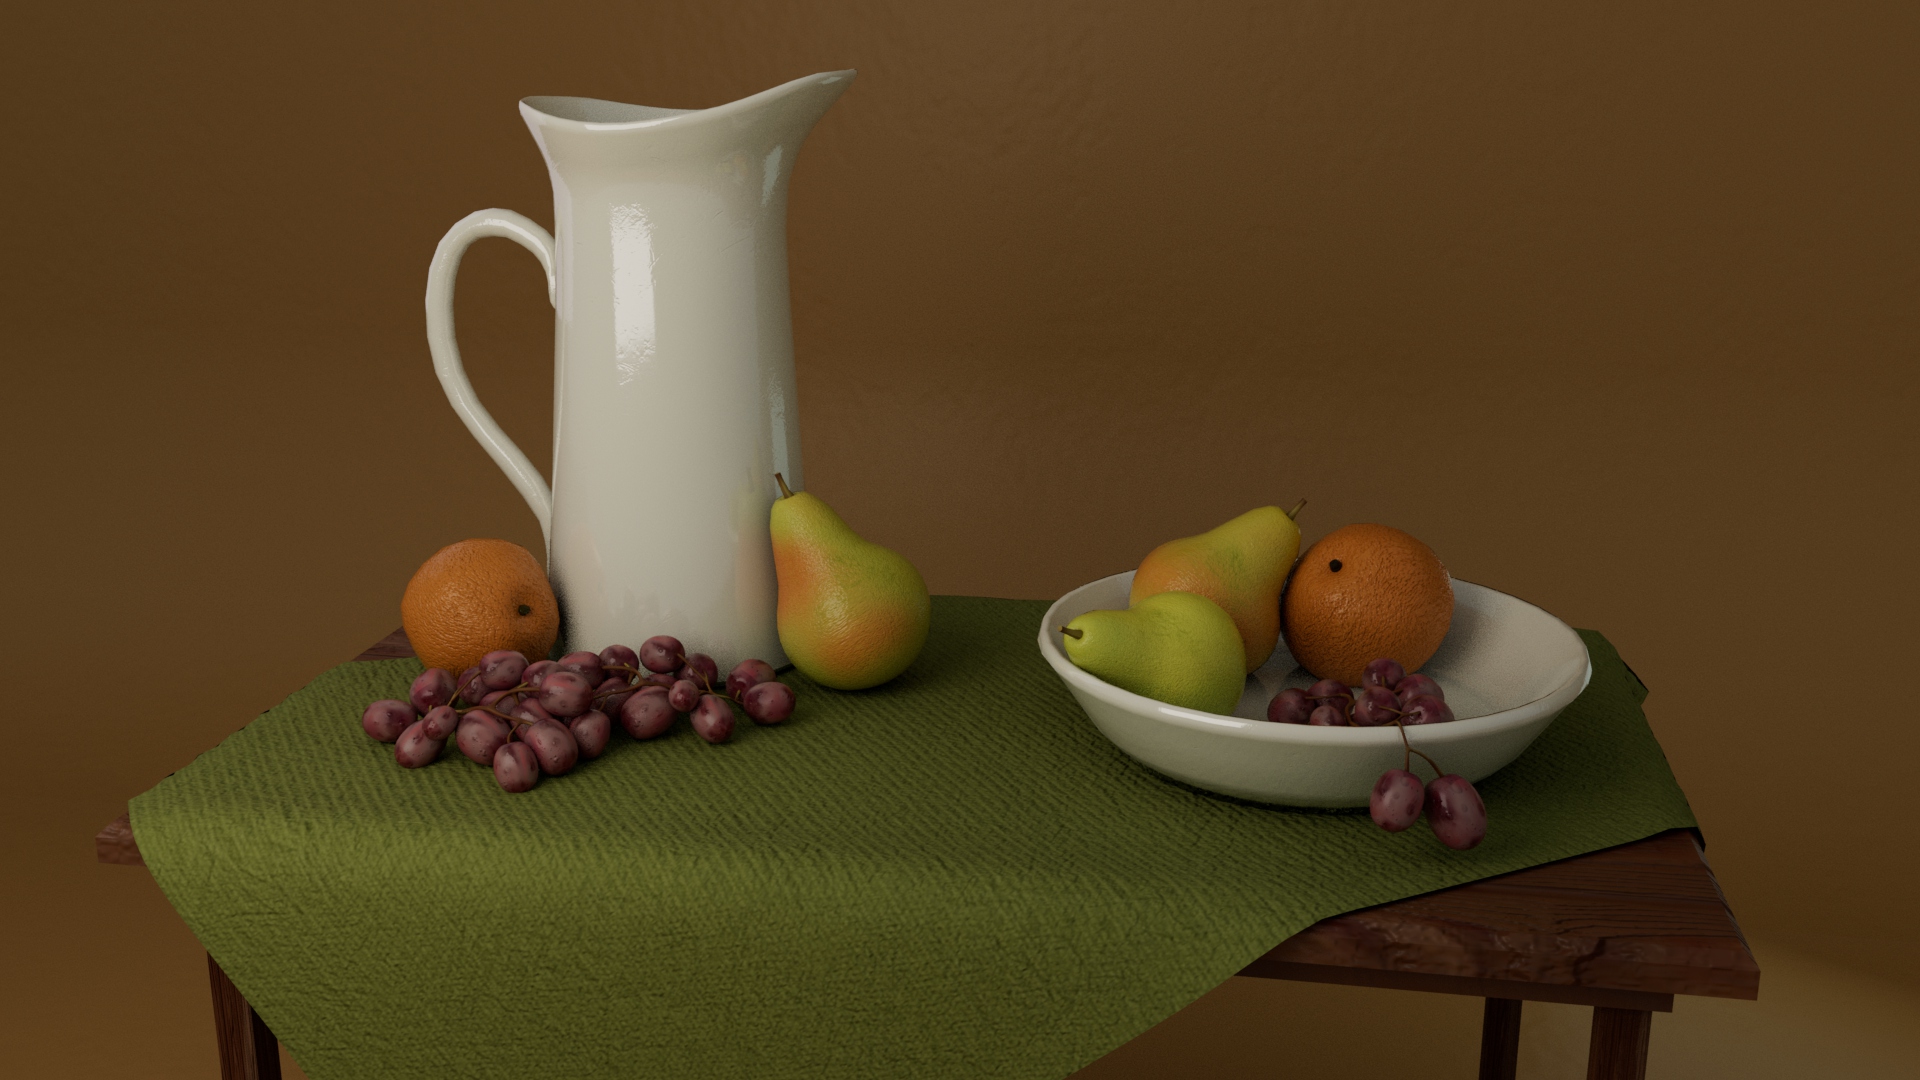 Vase with fruit in a bowl on a table